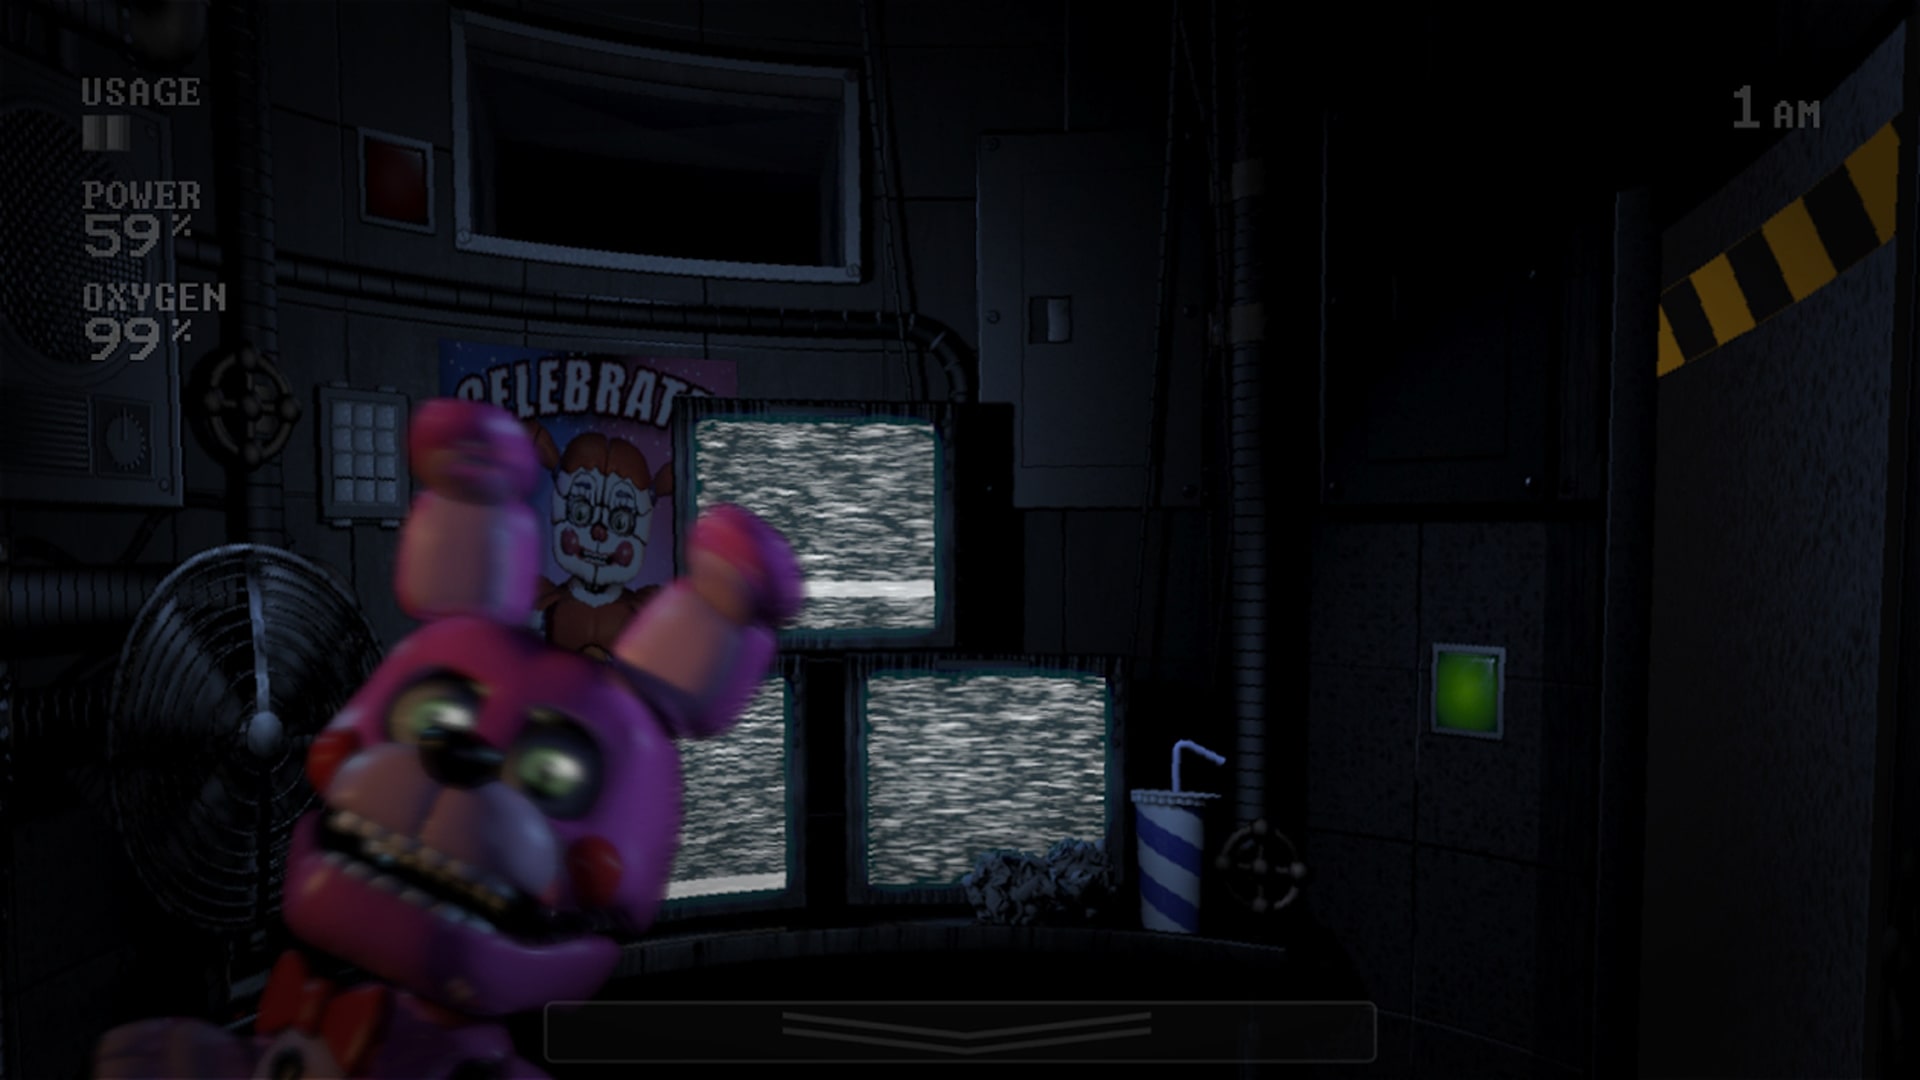 Five Nights at Freddy's: Security Breach (PS4) : : PC & Video  Games